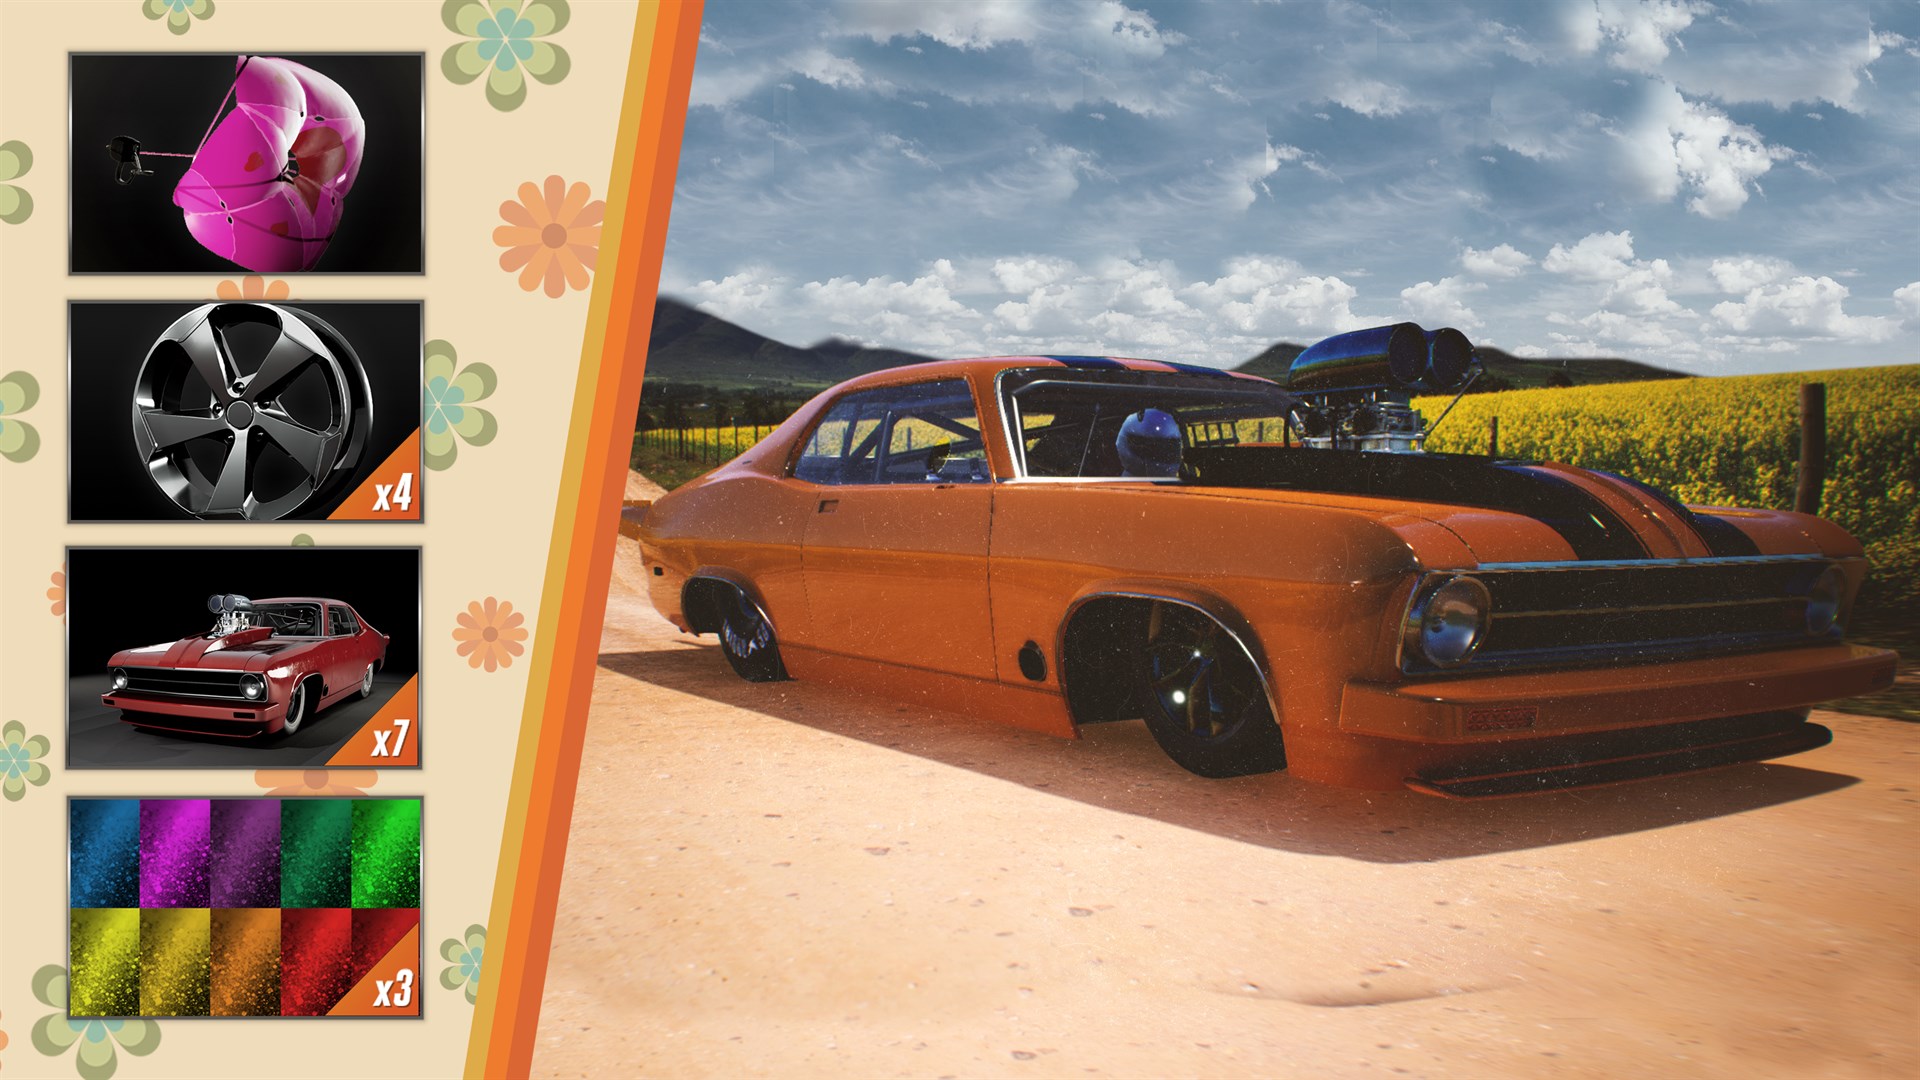 Street Outlaws 2: Winner Takes All – The 70s Car Bundle